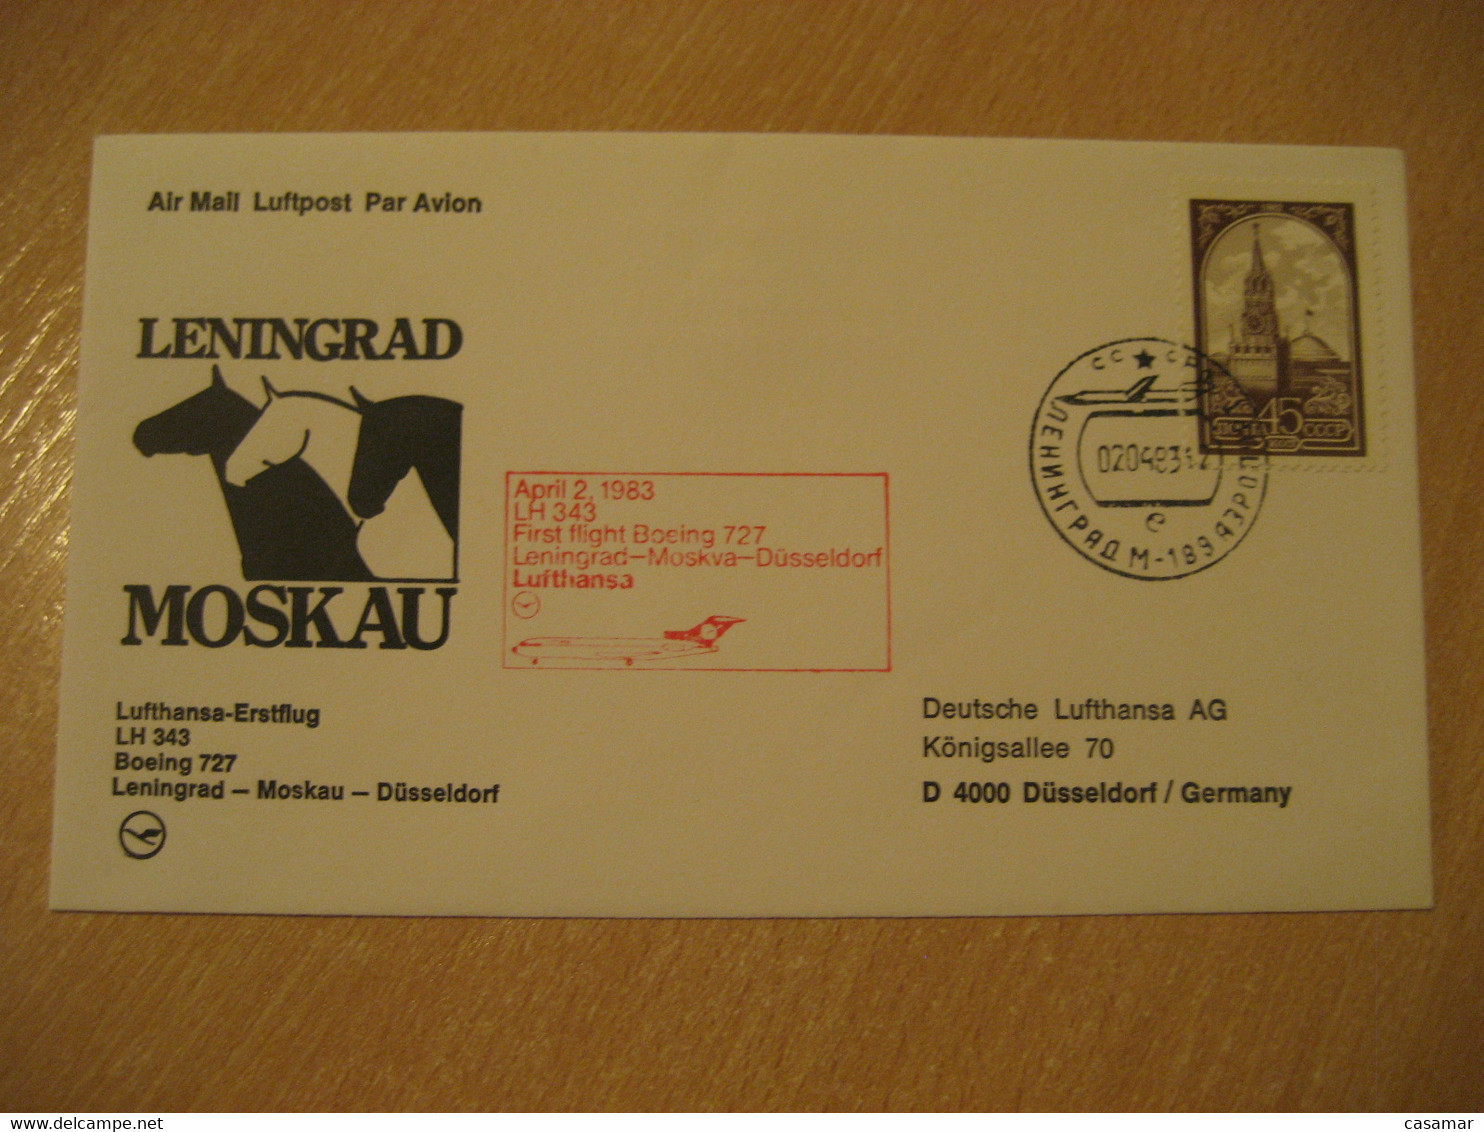 SAINT PETERSBURG MOSCOW Dusseldorf 1983 Lufthansa Airlines Boeing 727 First Flight Red Cancel Cover RUSSIA USSR GERMANY - Covers & Documents